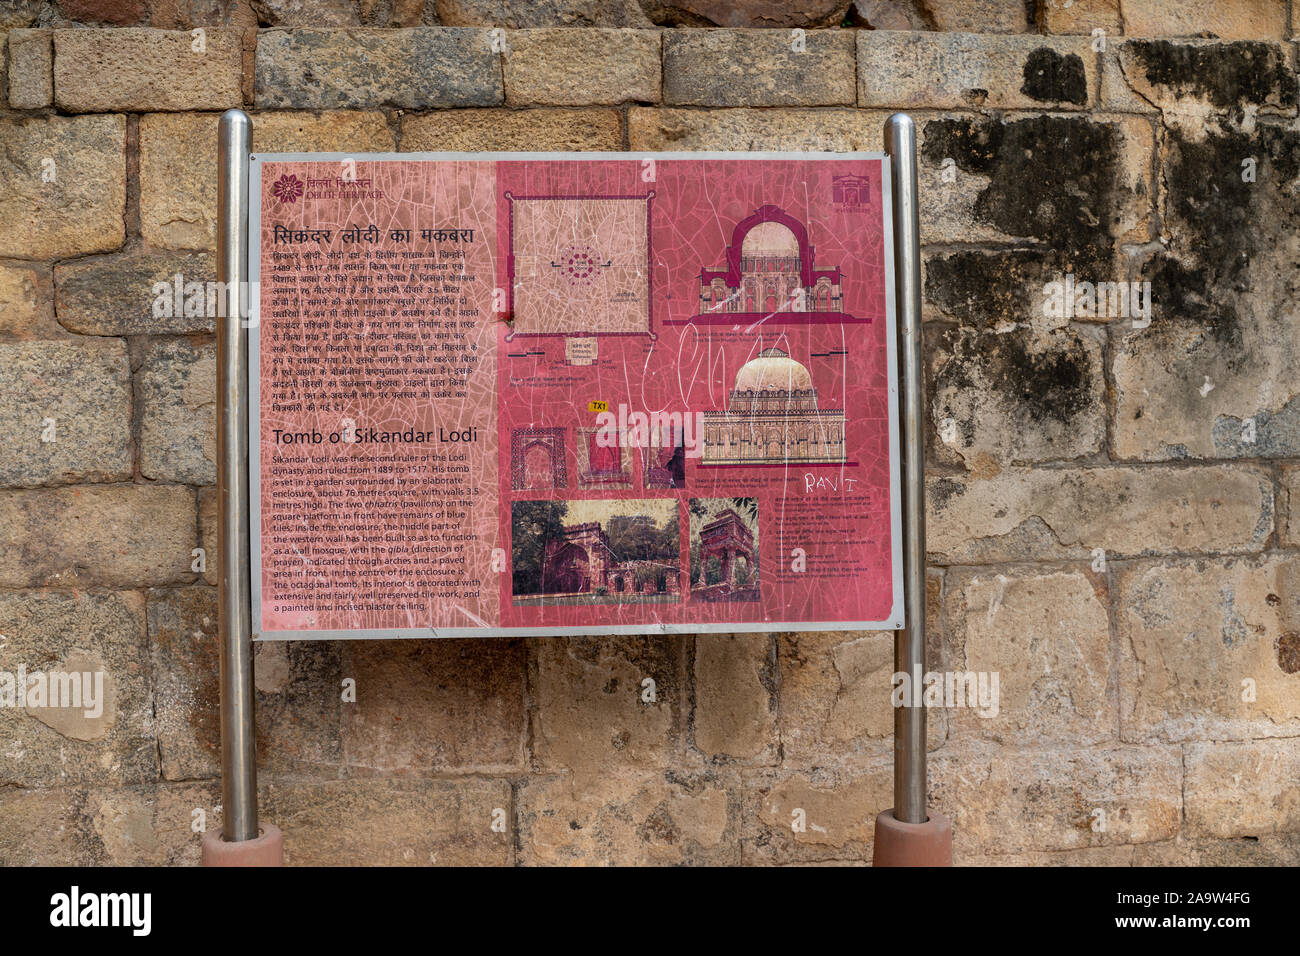 New Delhi, India - November 16, 2019: Sign in Lodi Garden explaining the historical significance of the Tomb of Sikandar Lodi located in the park Stock Photo